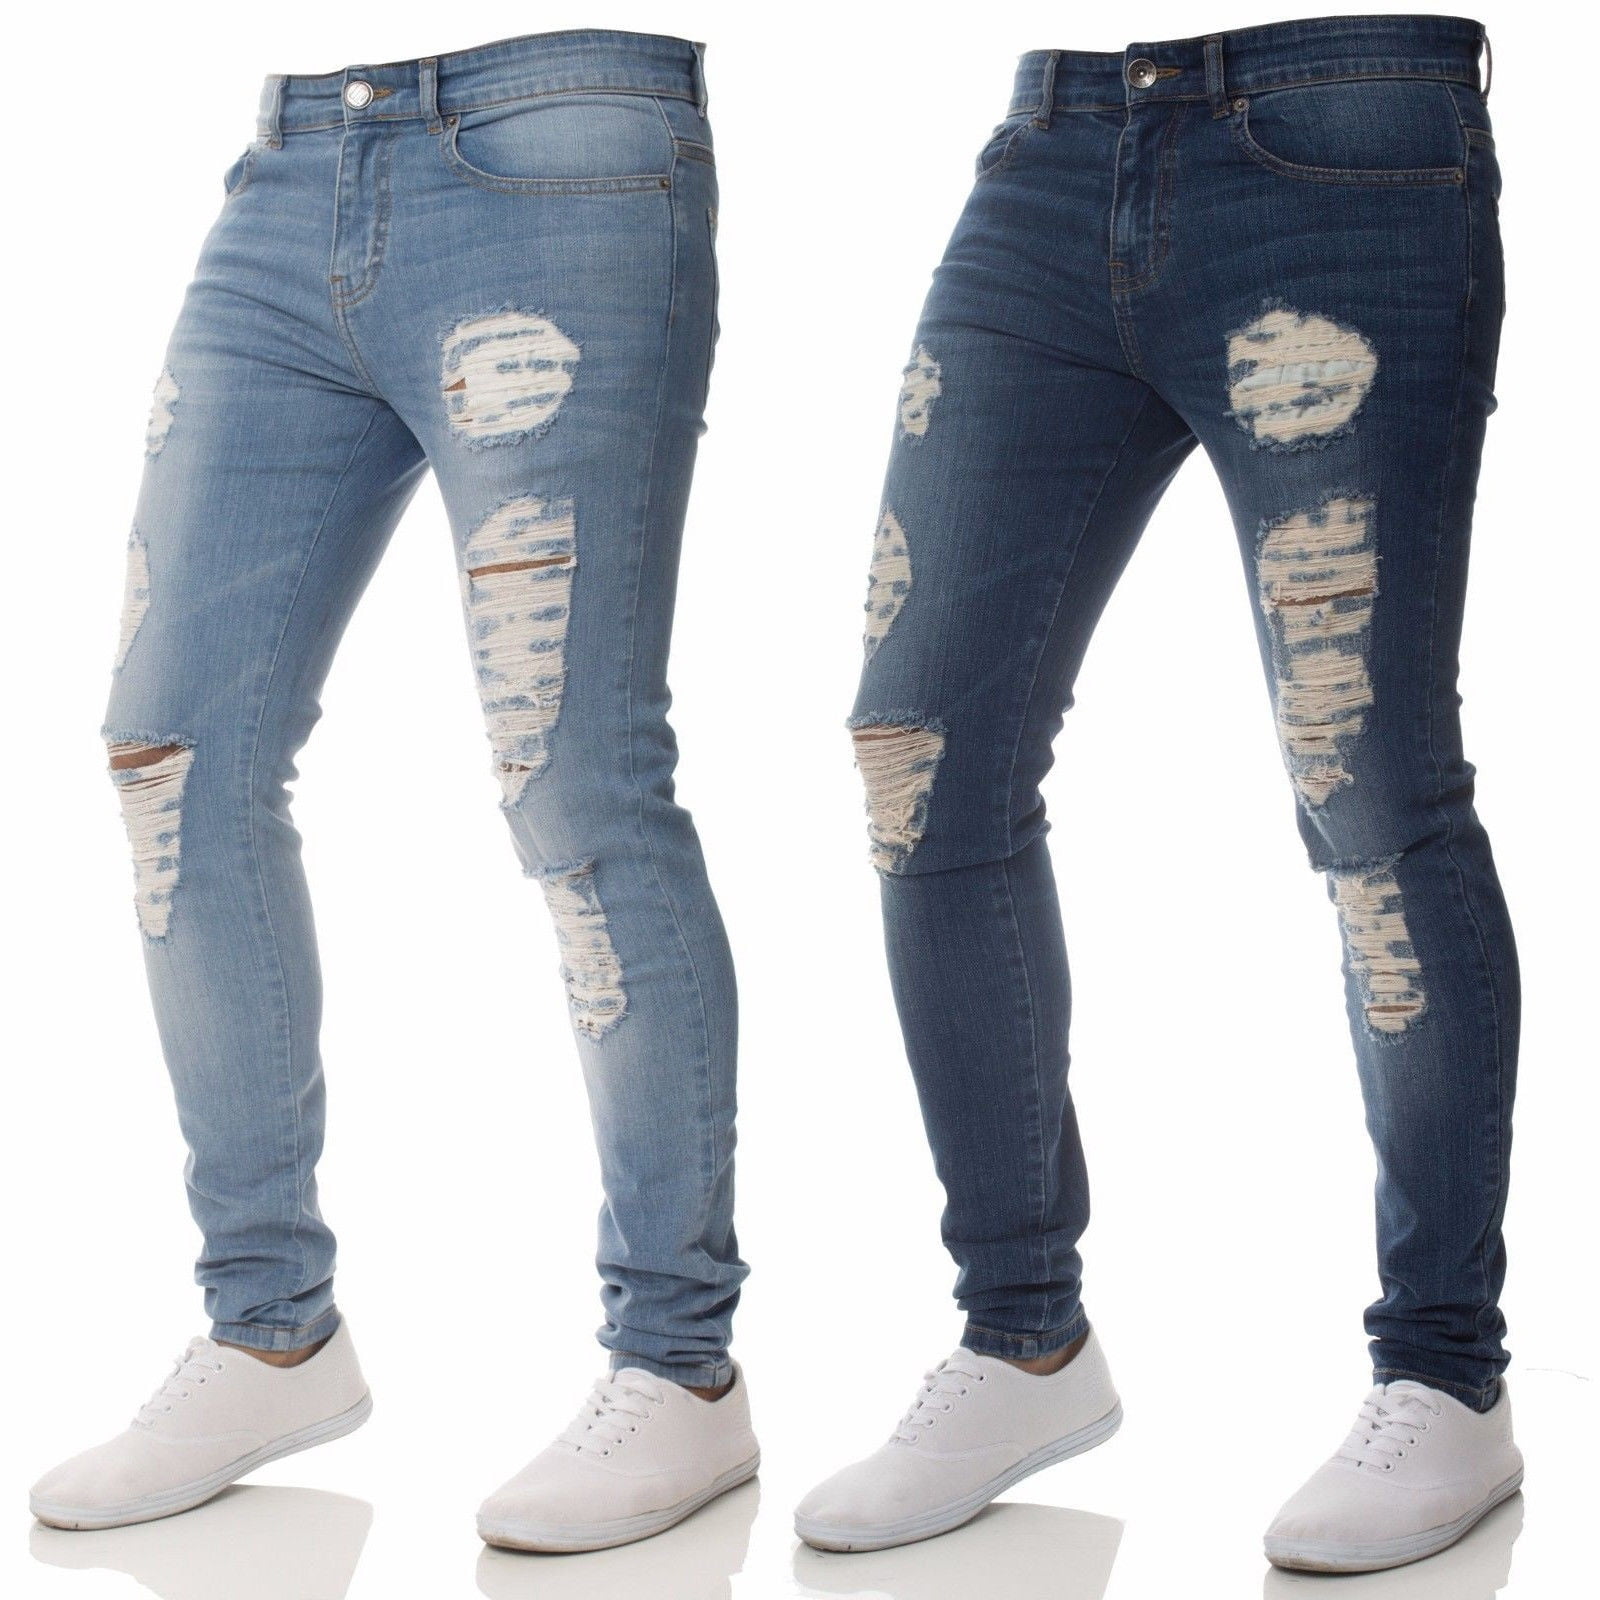 2018 New Fashion Men´s Skinny Ripped Destroyed Distressed Jeans Plain ...